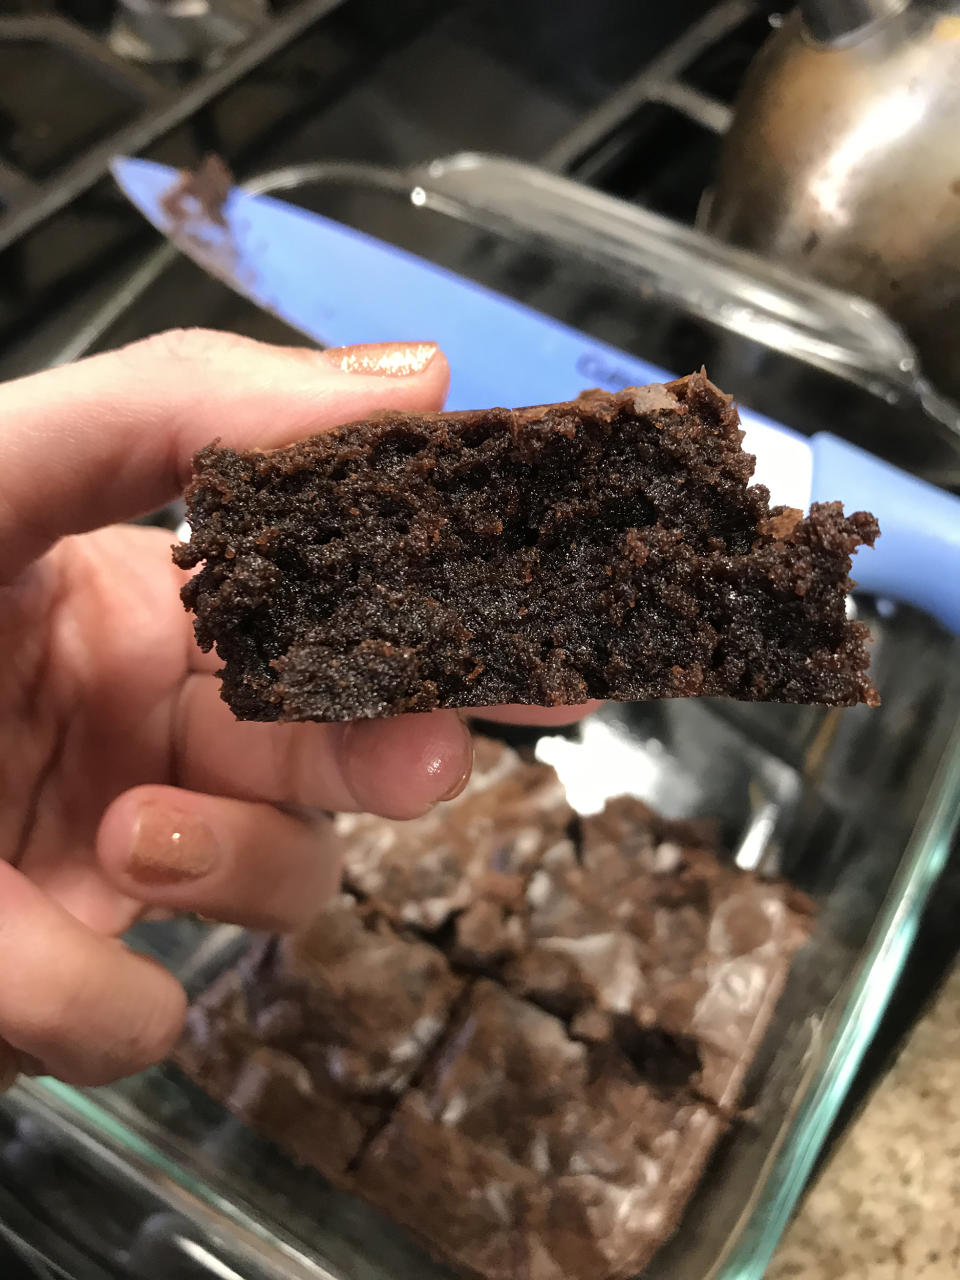 Reducing the number of eggs results in a fudgier brownie. Prefer a cake-like brownie? Try adding an extra egg instead. (Rheana Murray / TODAY)